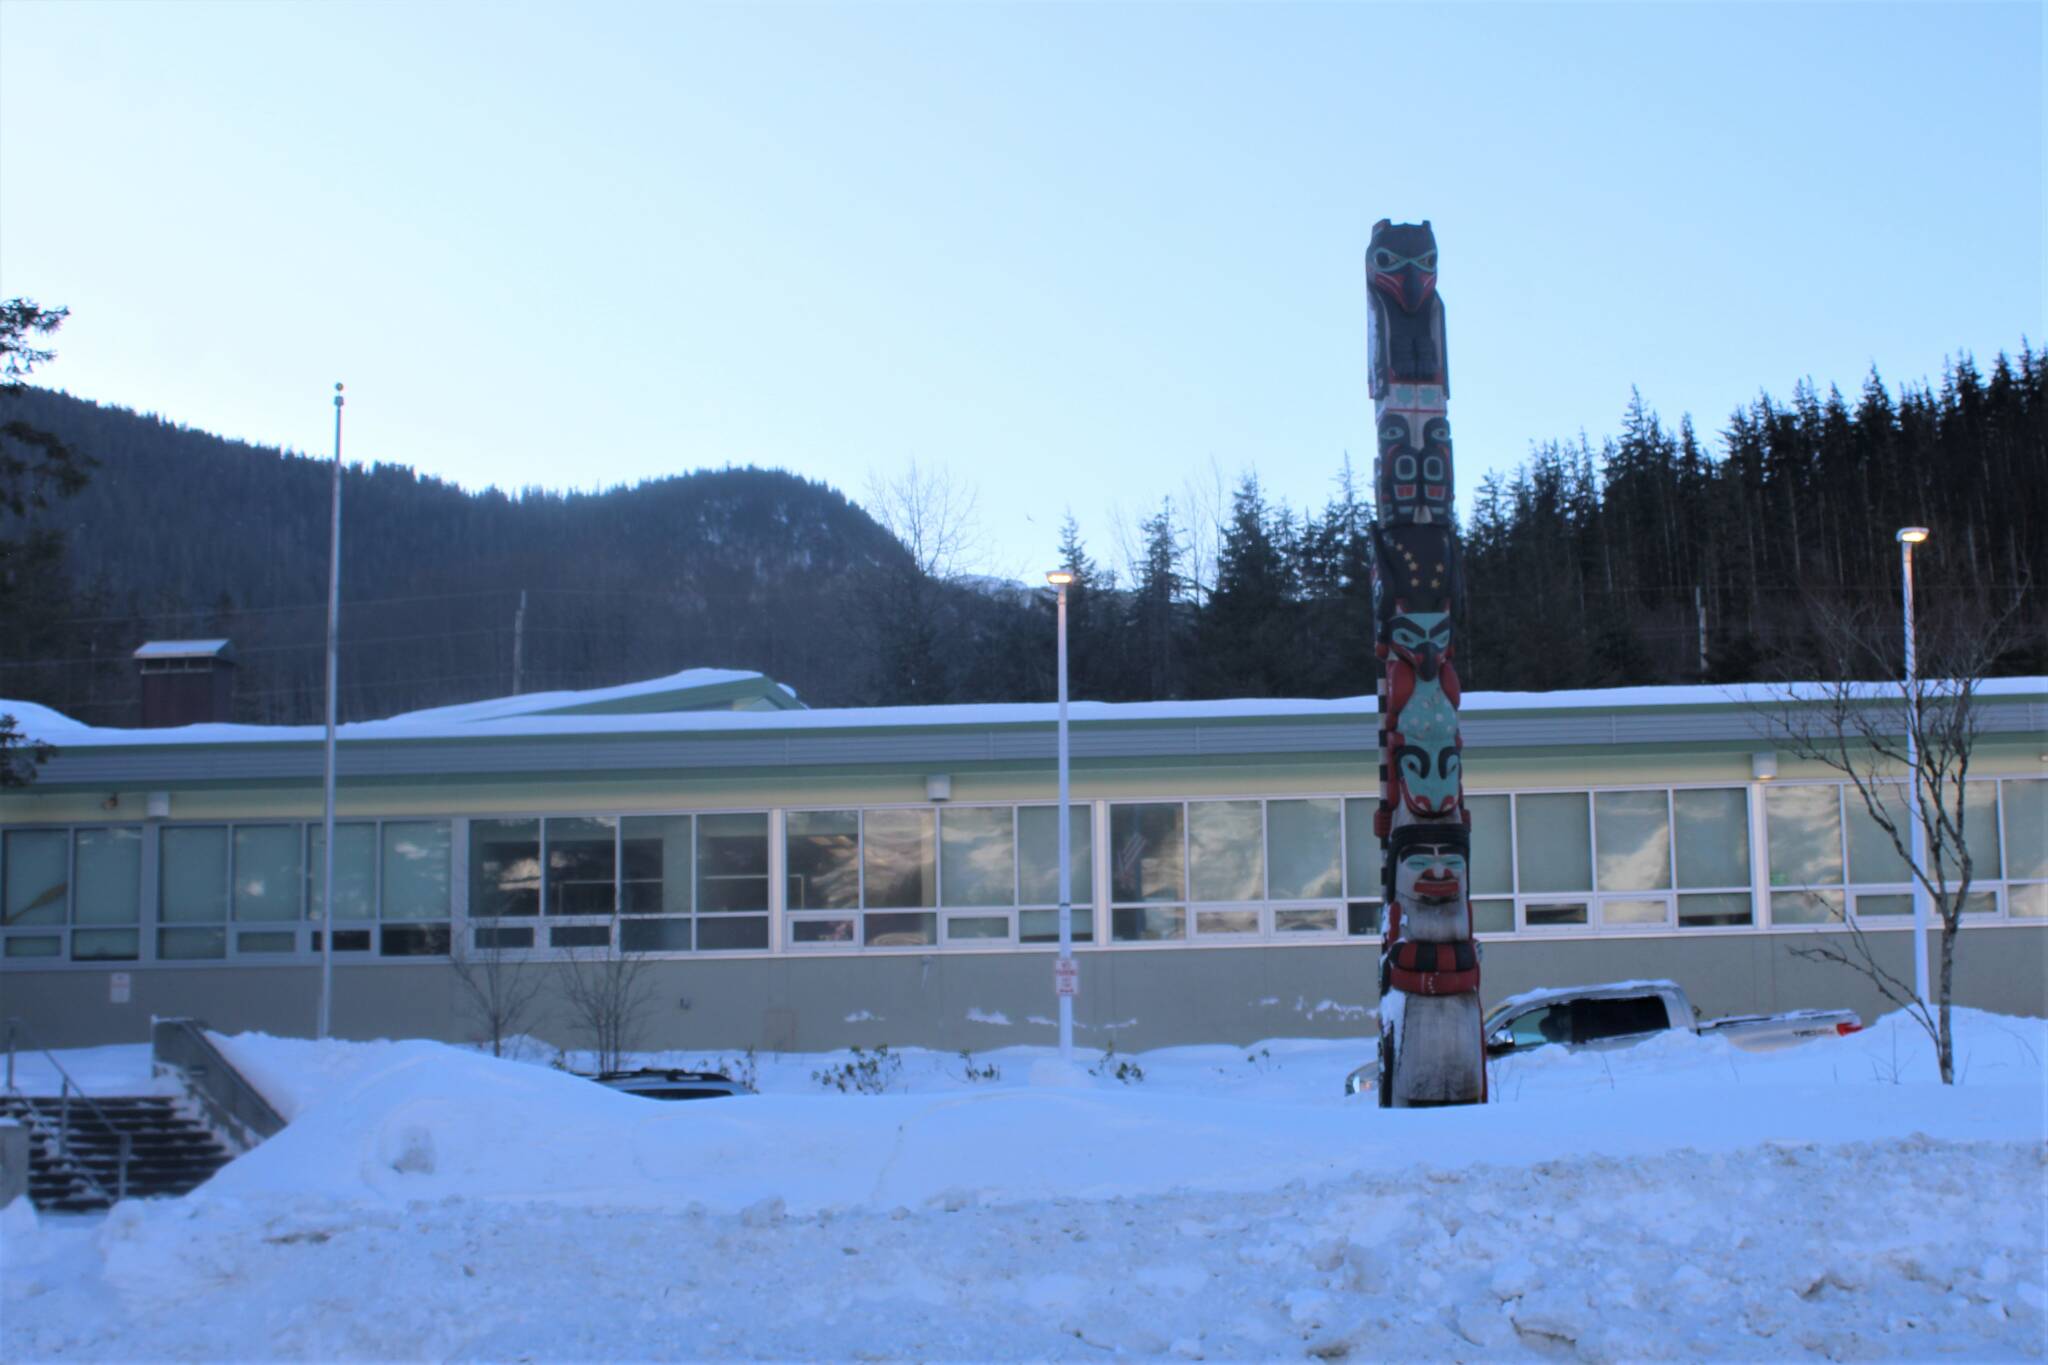 Sayéik: Gastineau Community School stands against a snowy backdrop on Jan. 4. Students in the Juneau School District are set to return to class on Monday. Despite rising COVID-19 cases across the City and Borough of Juneau, school officials say schools will be open and ready to welcome students. (Dana Zigmund/Juneau Empire)